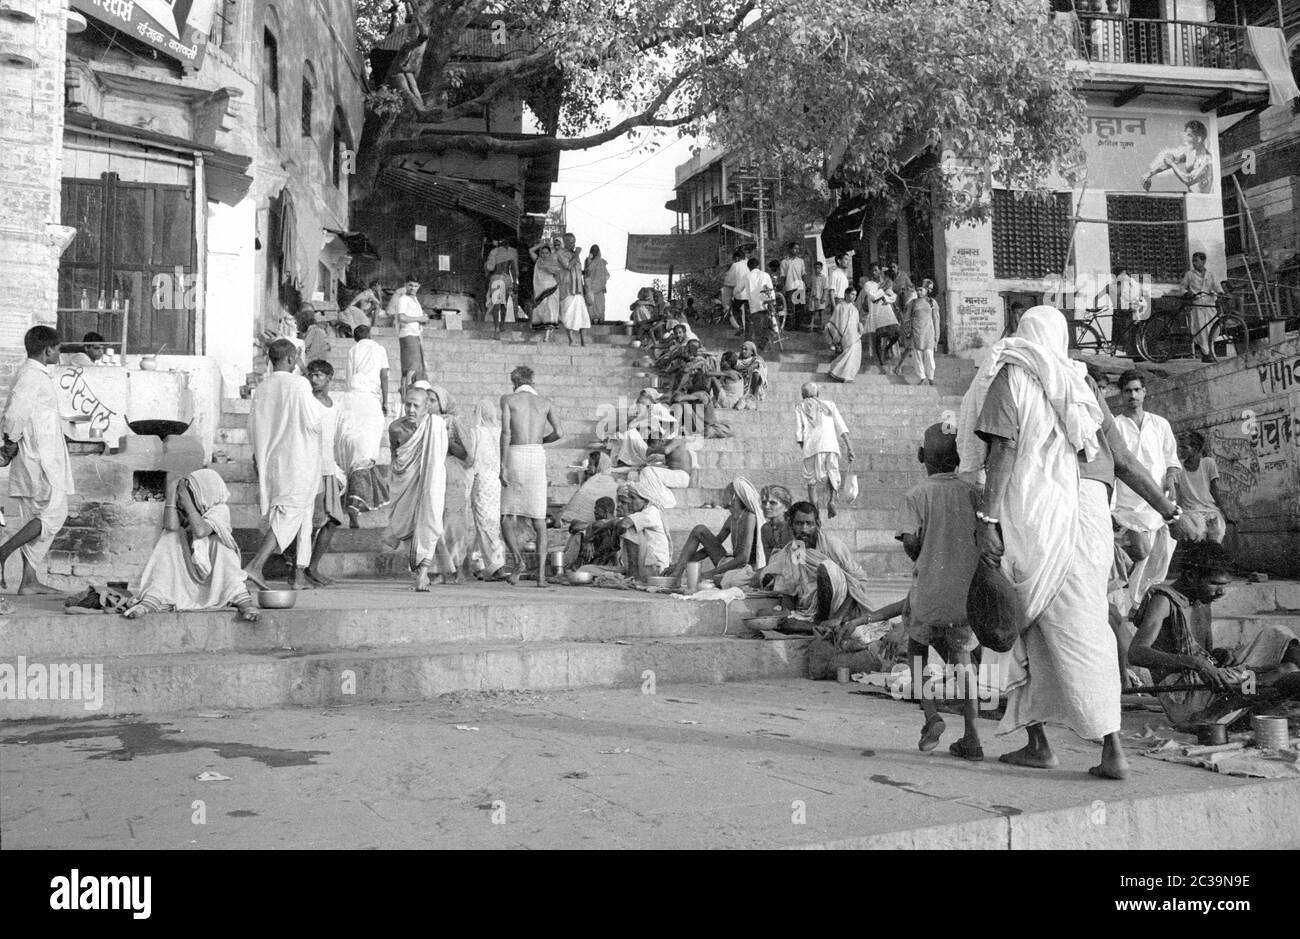 A street scene in the Indian city of Benares on the Ganges, also known as Varanasi or Kashi. Stock Photo